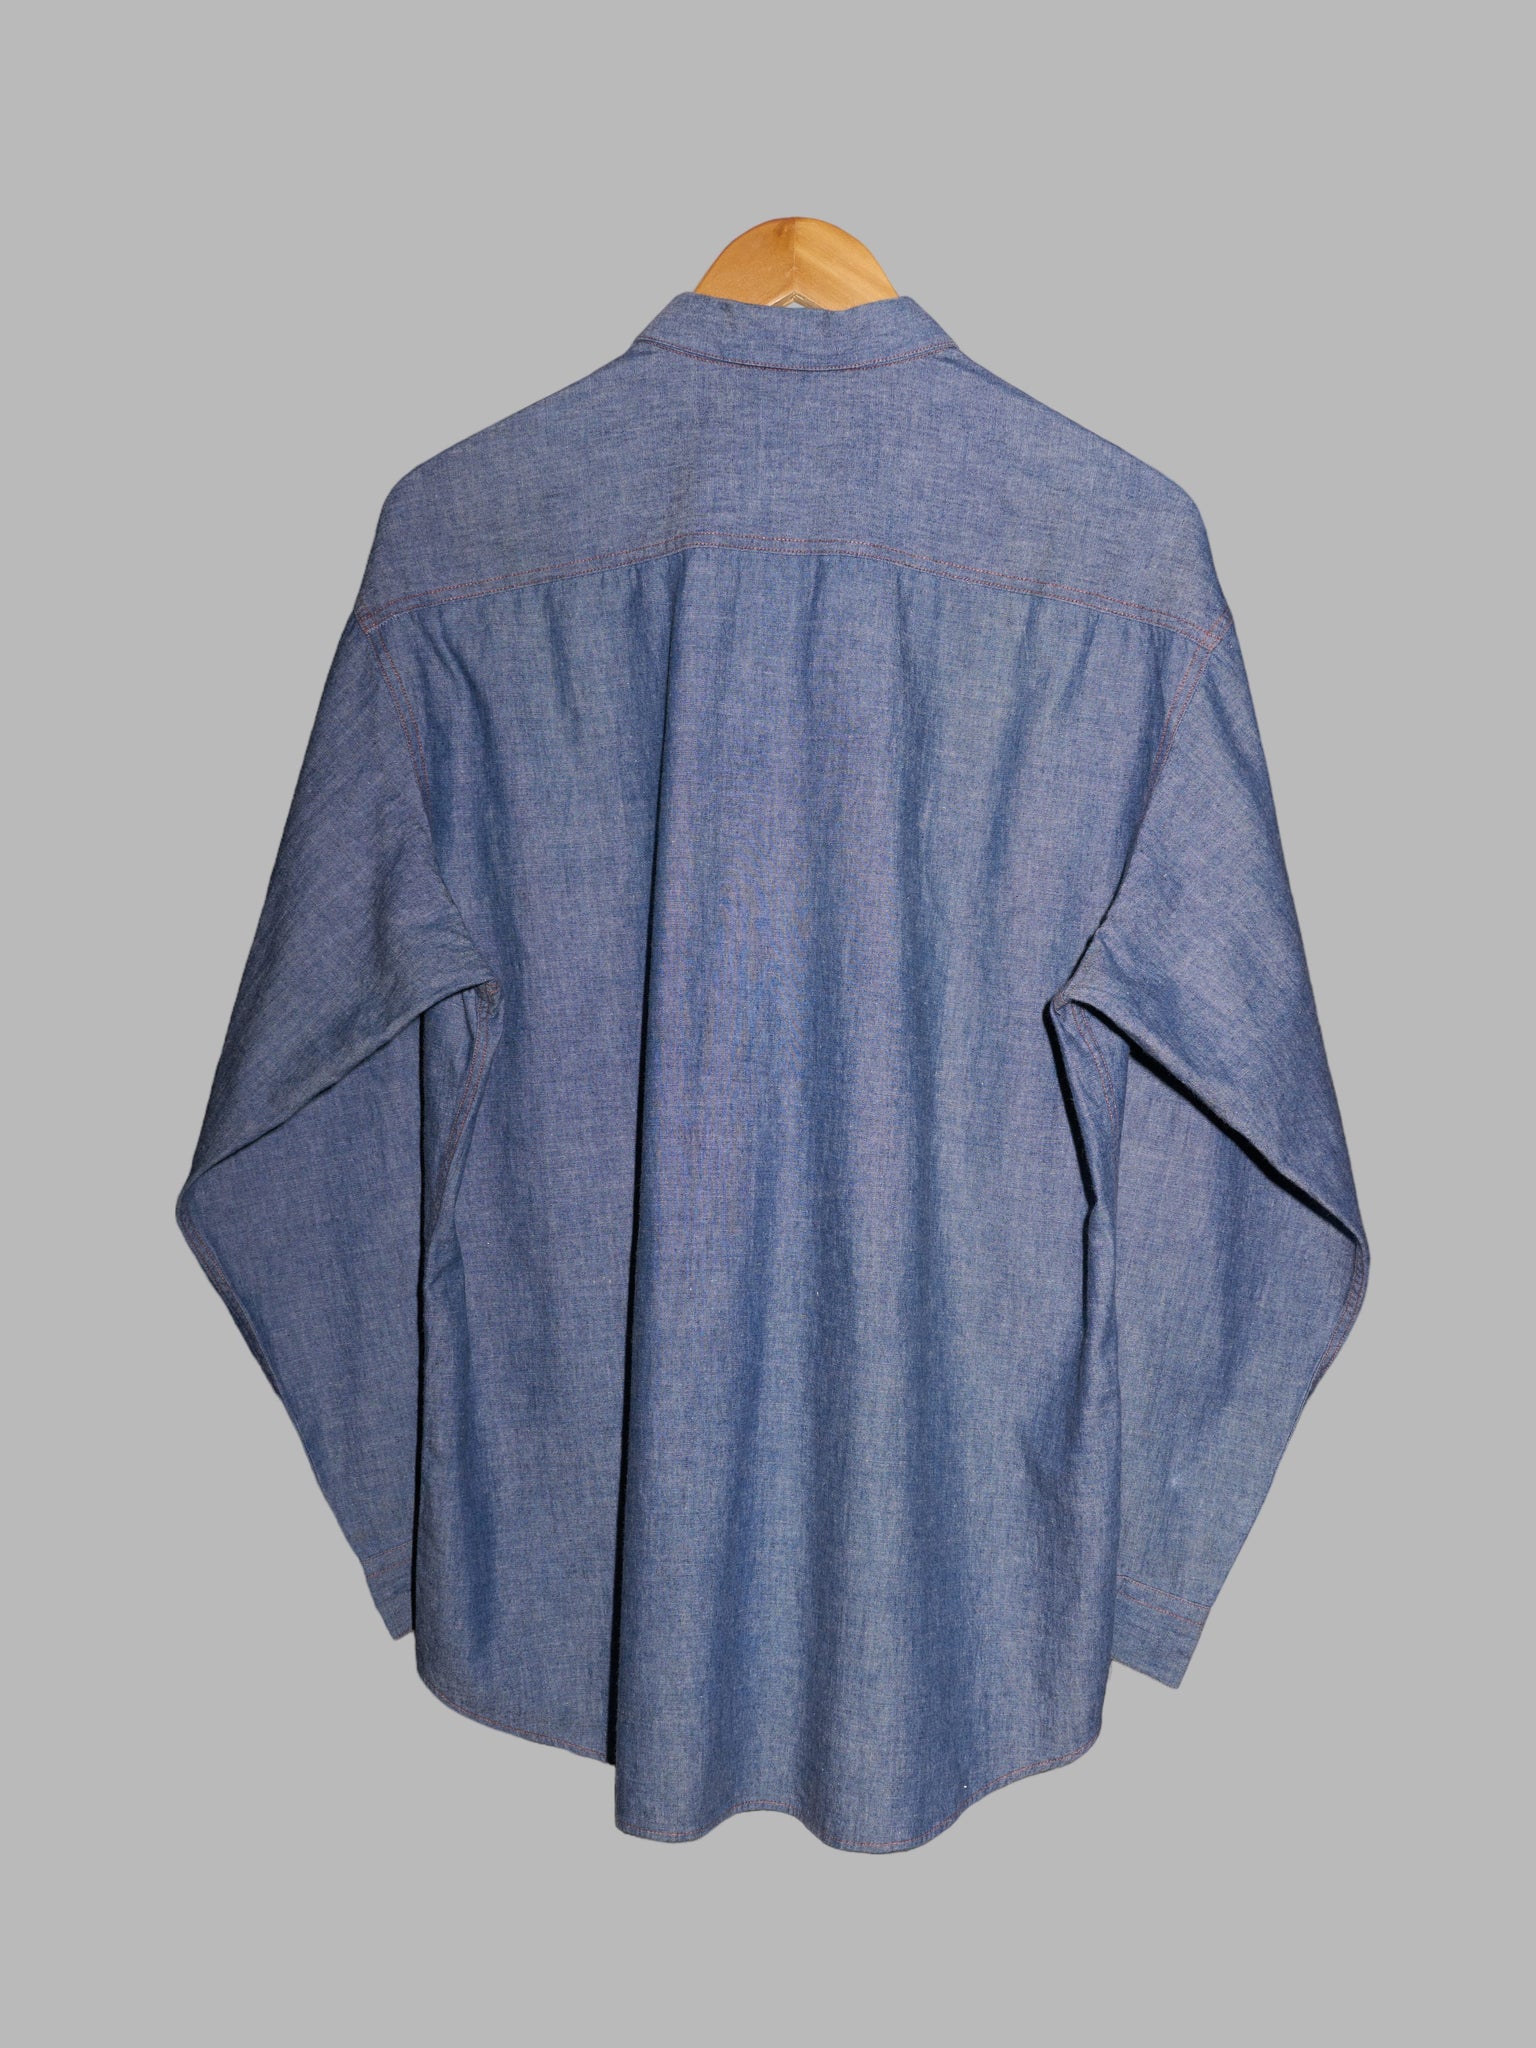 Jun Men 1990s blue chambray shirt with floral embroidered placket - M